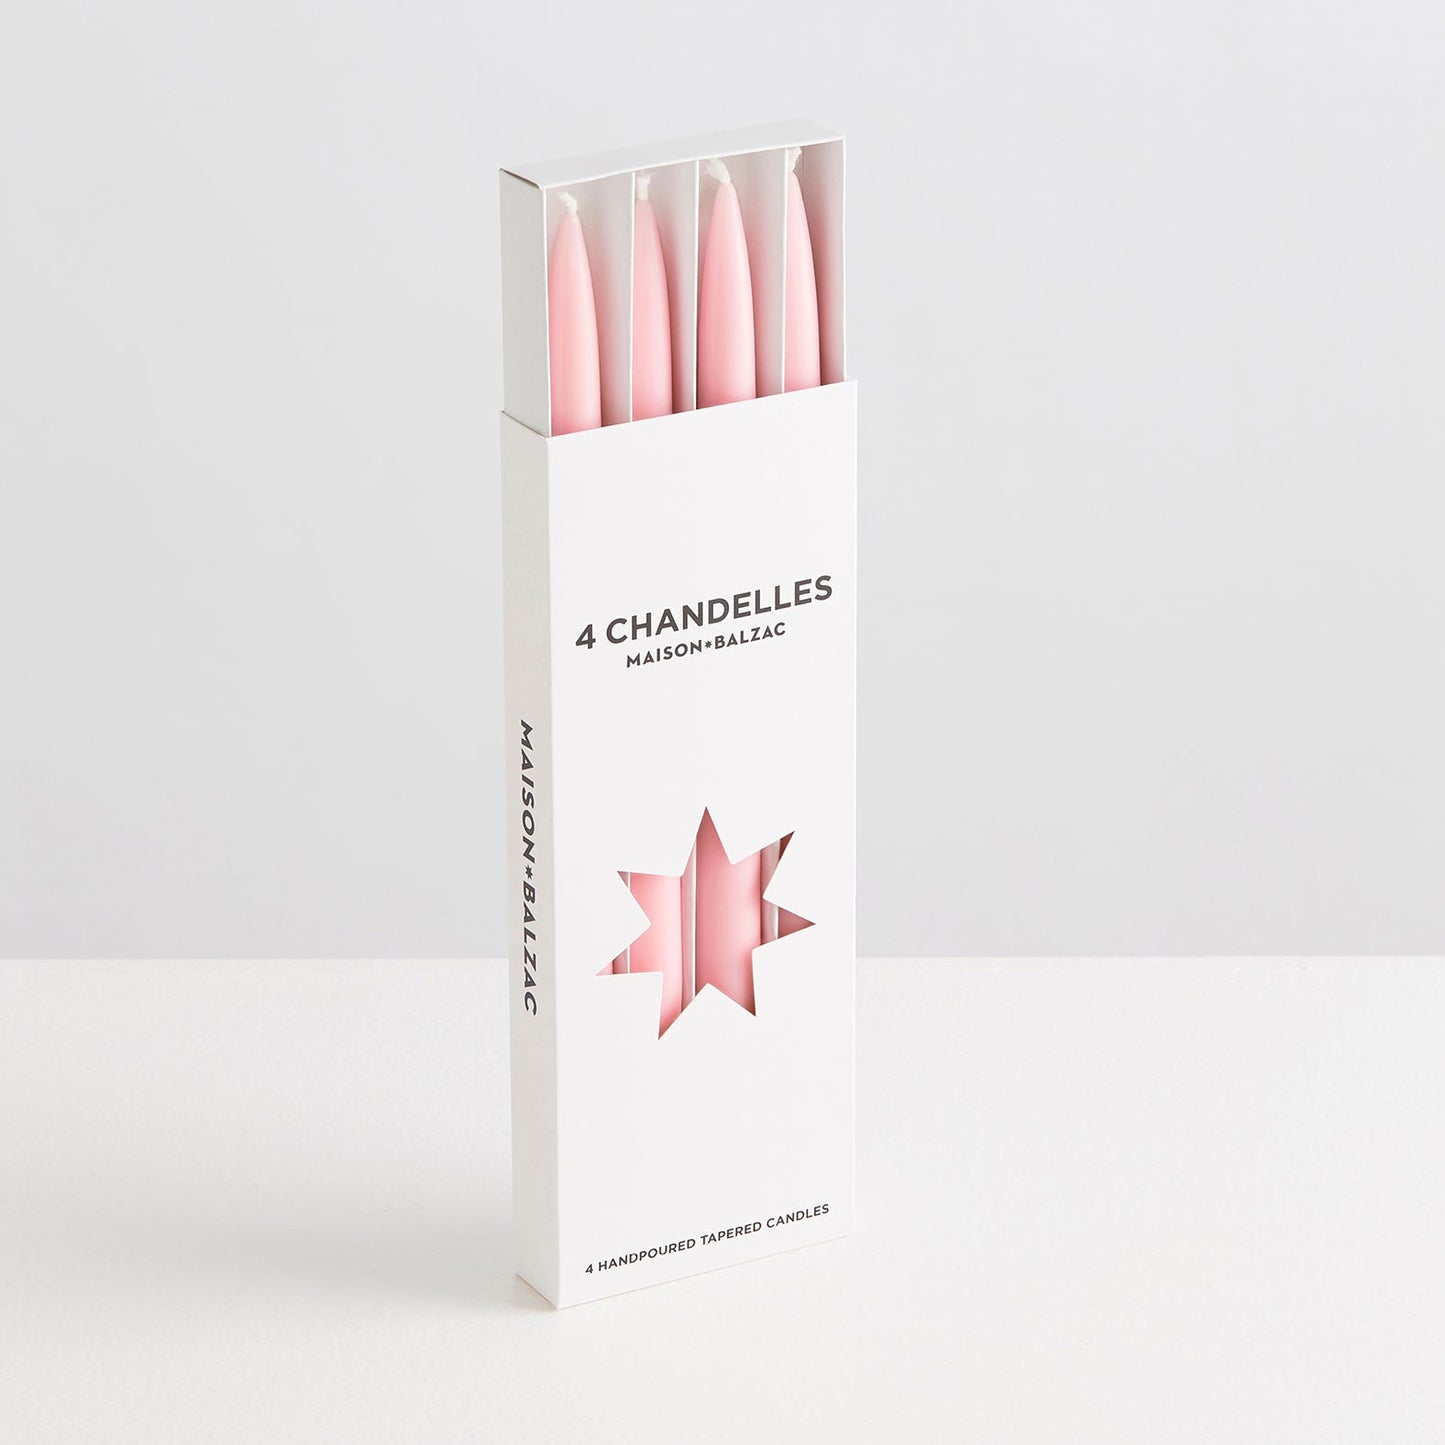 Maison Balzac 4 Chandelles Tapered Candles - Pink